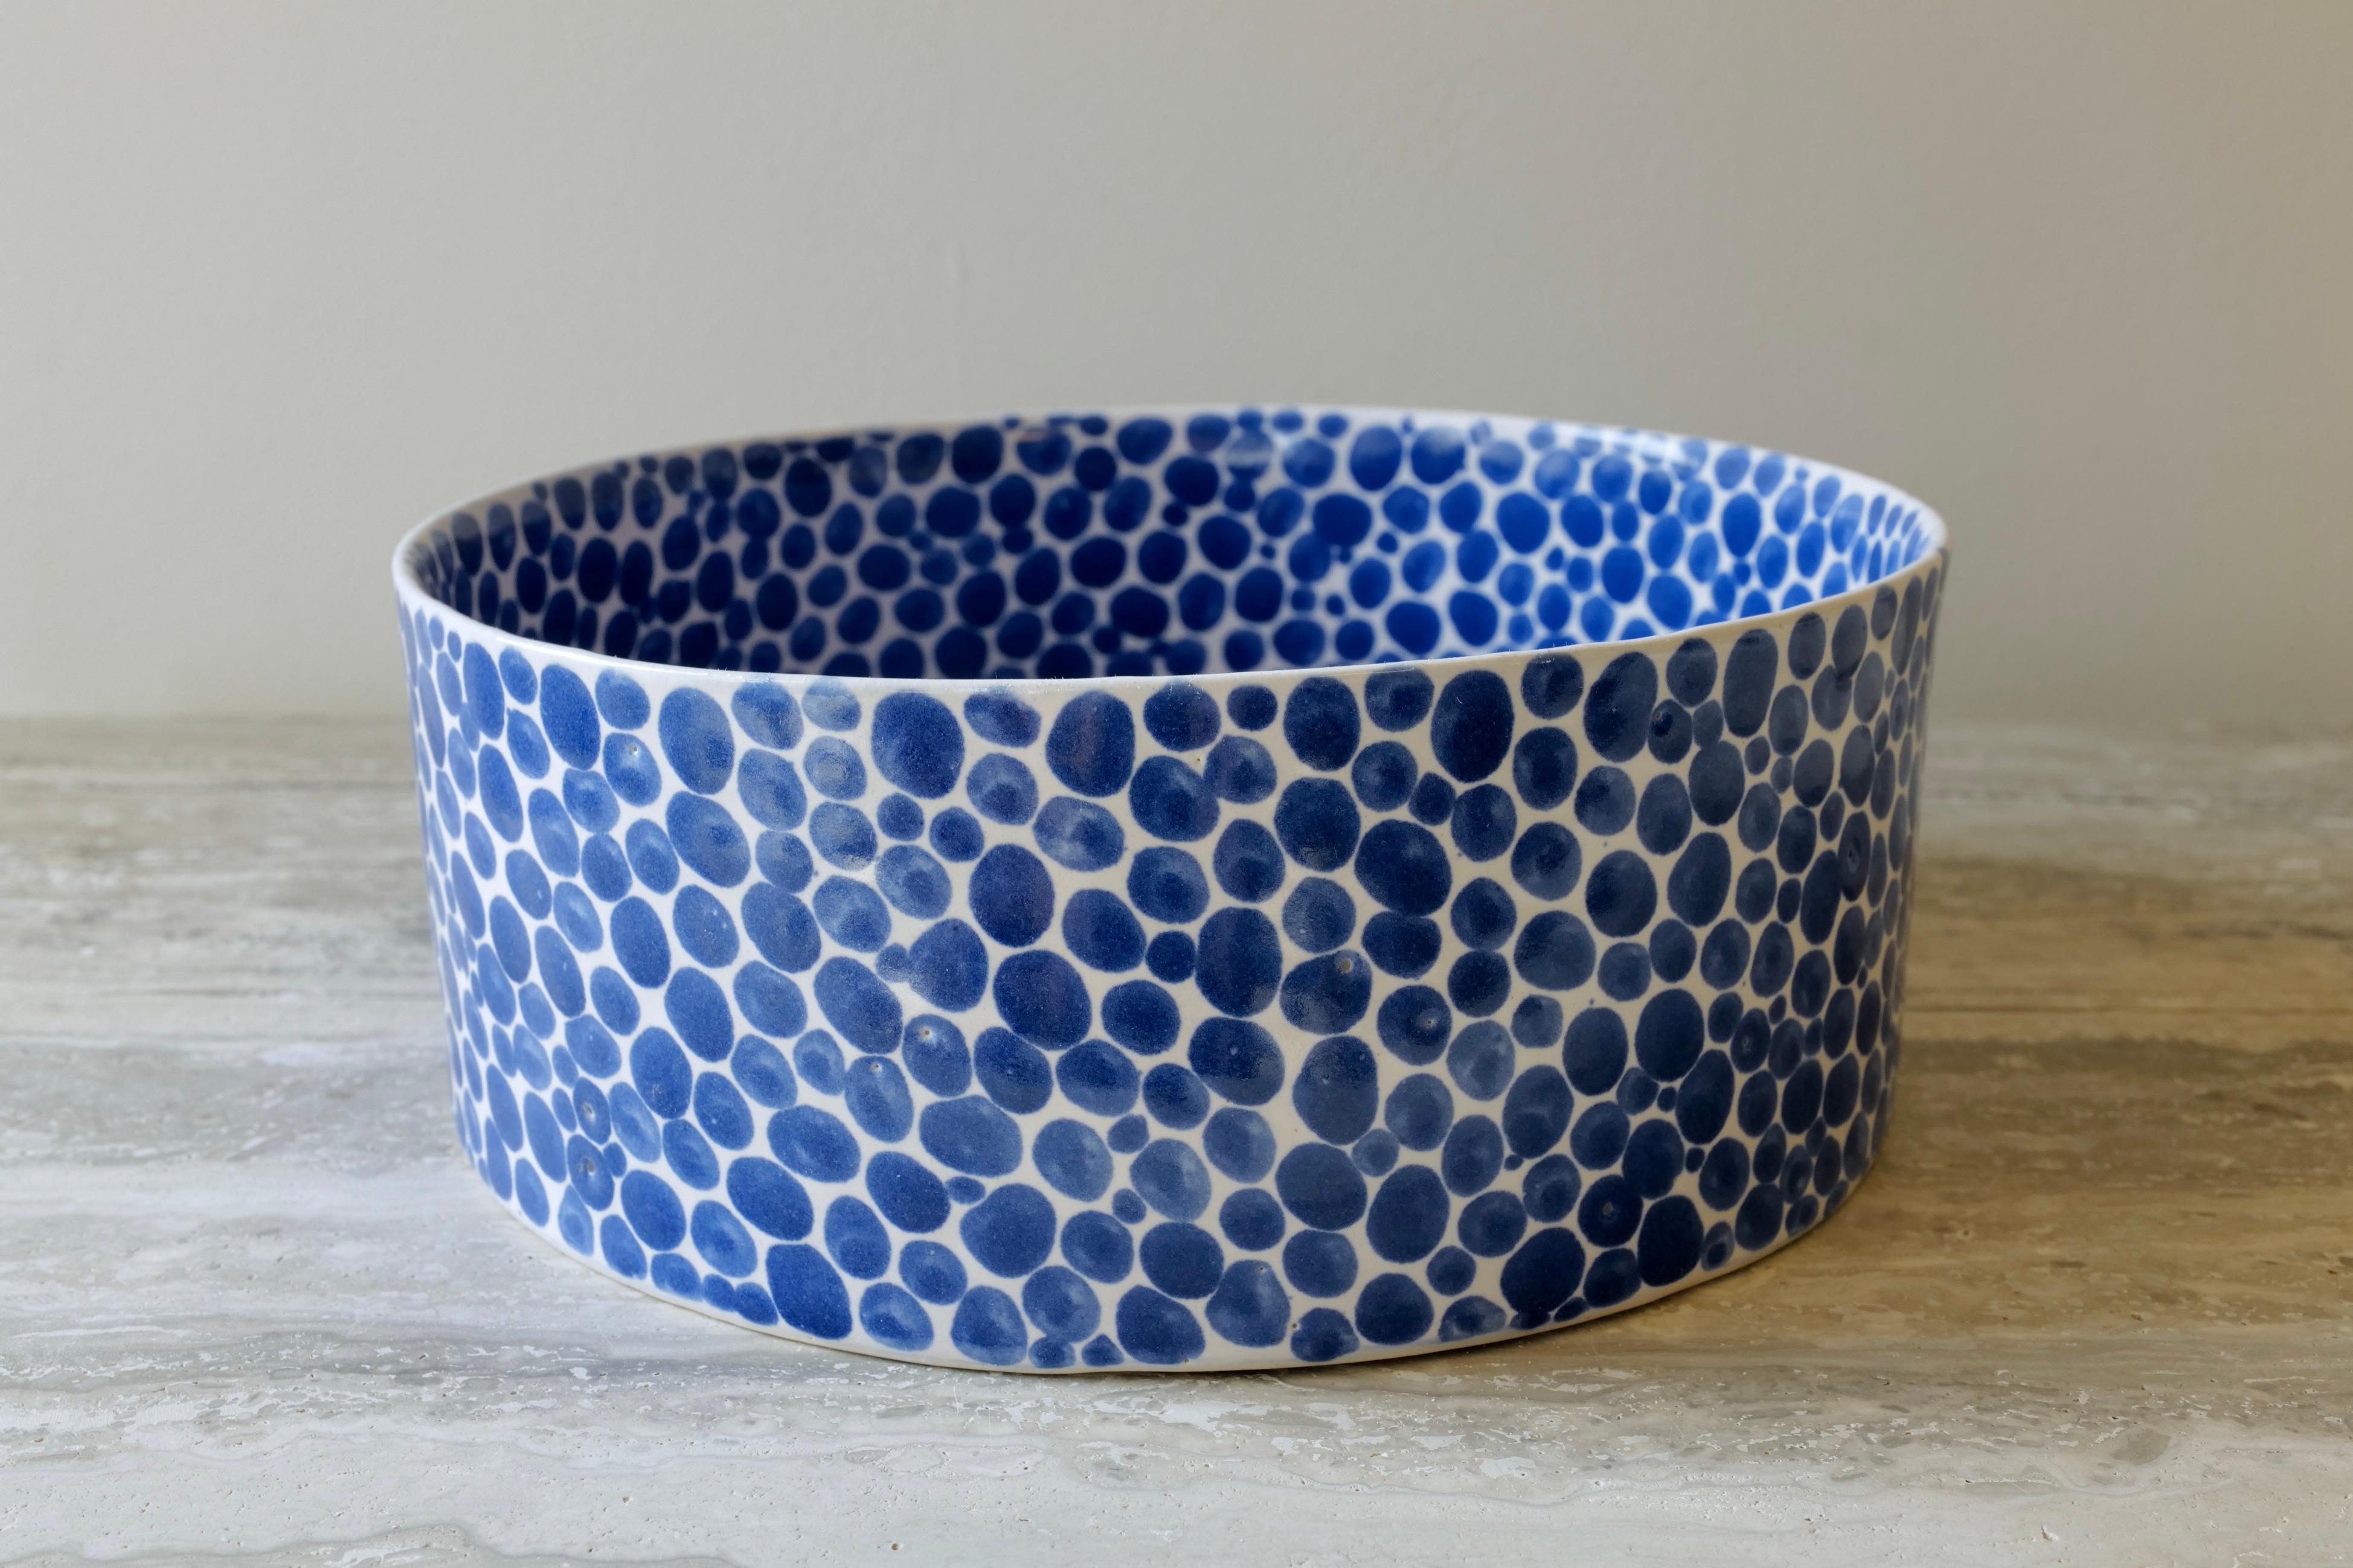 This multi-functional bowl is perfect for fruits or vegetables or for serving food. Hand-cast in porcelain and once bisque fired, each dot is hand-painted with traditional cobalt blue glaze. An unconventional layered glazing technique, developed by